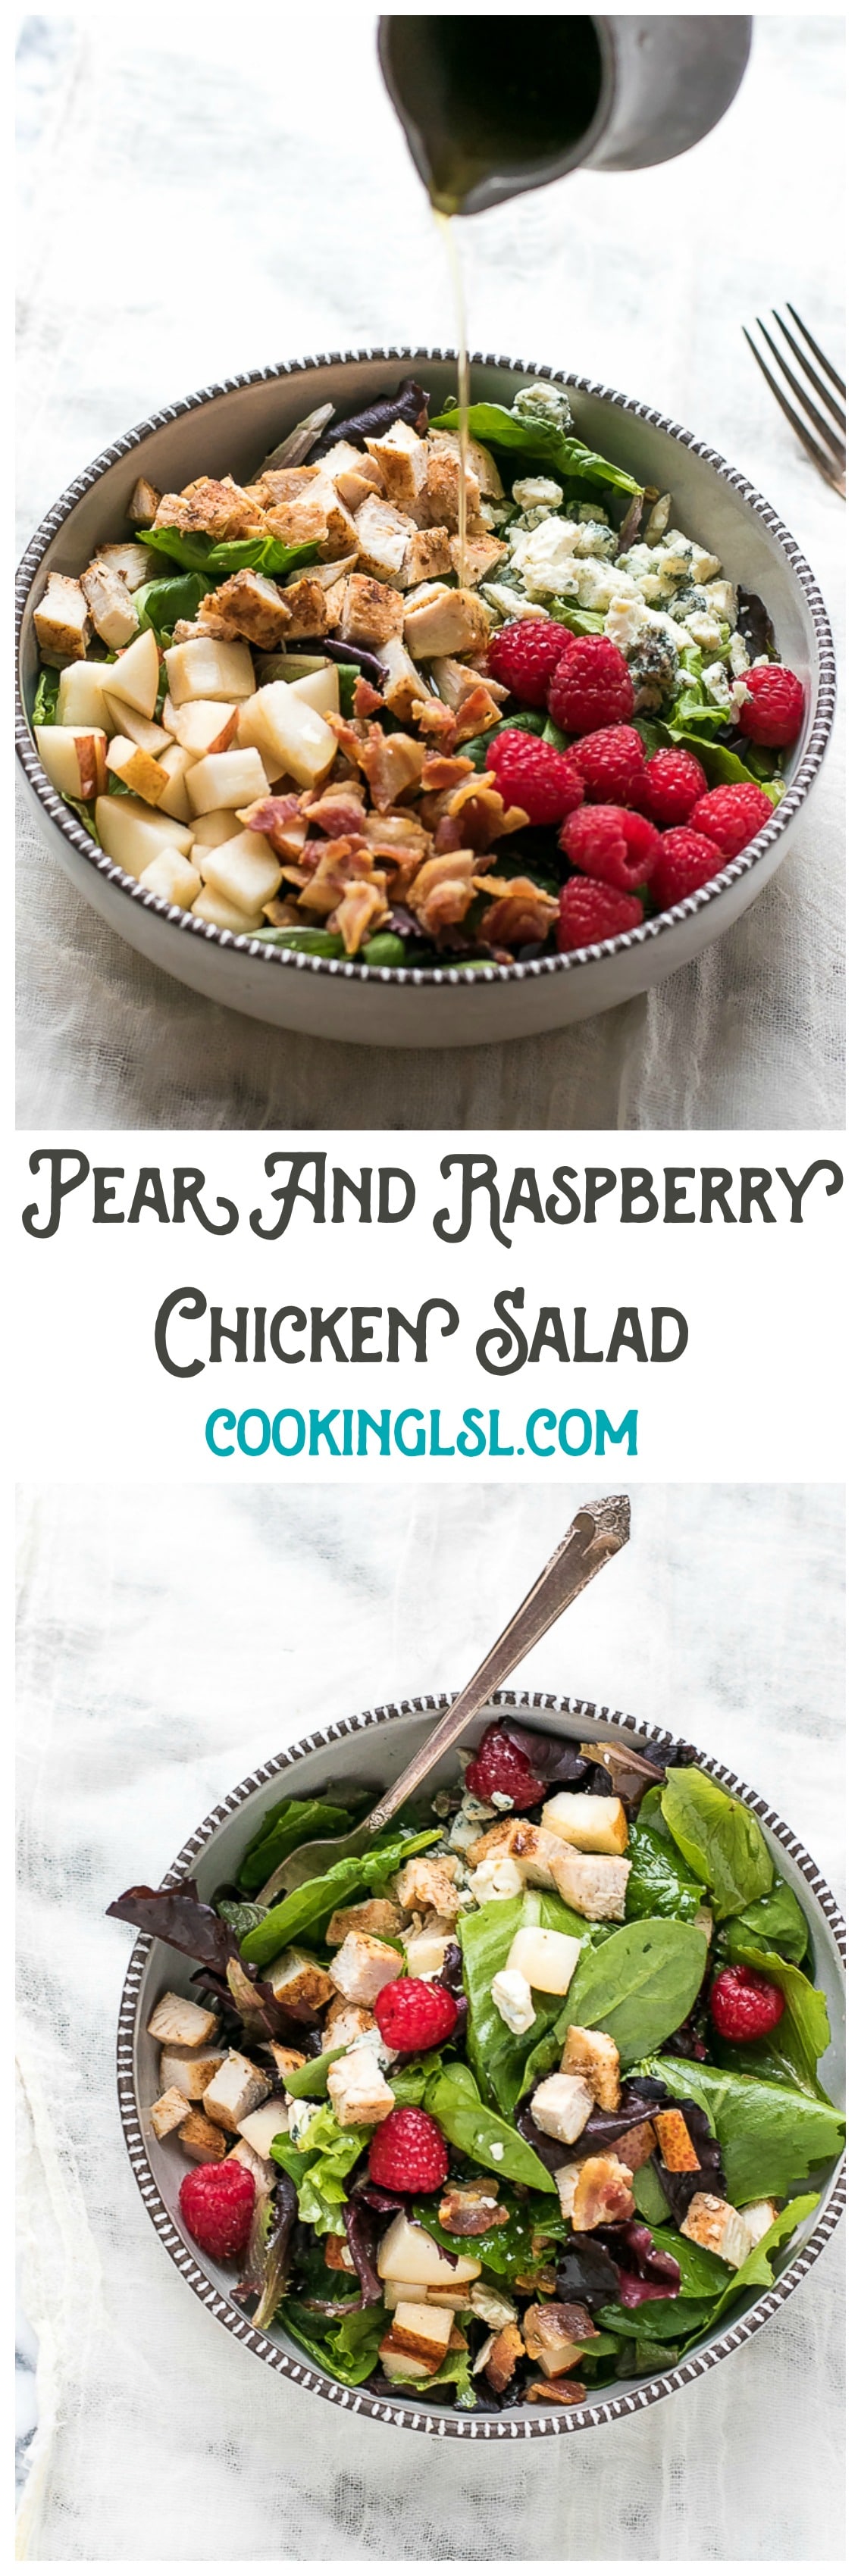 Pear And Raspberry Chicken Salad Recipe - Cooking LSL